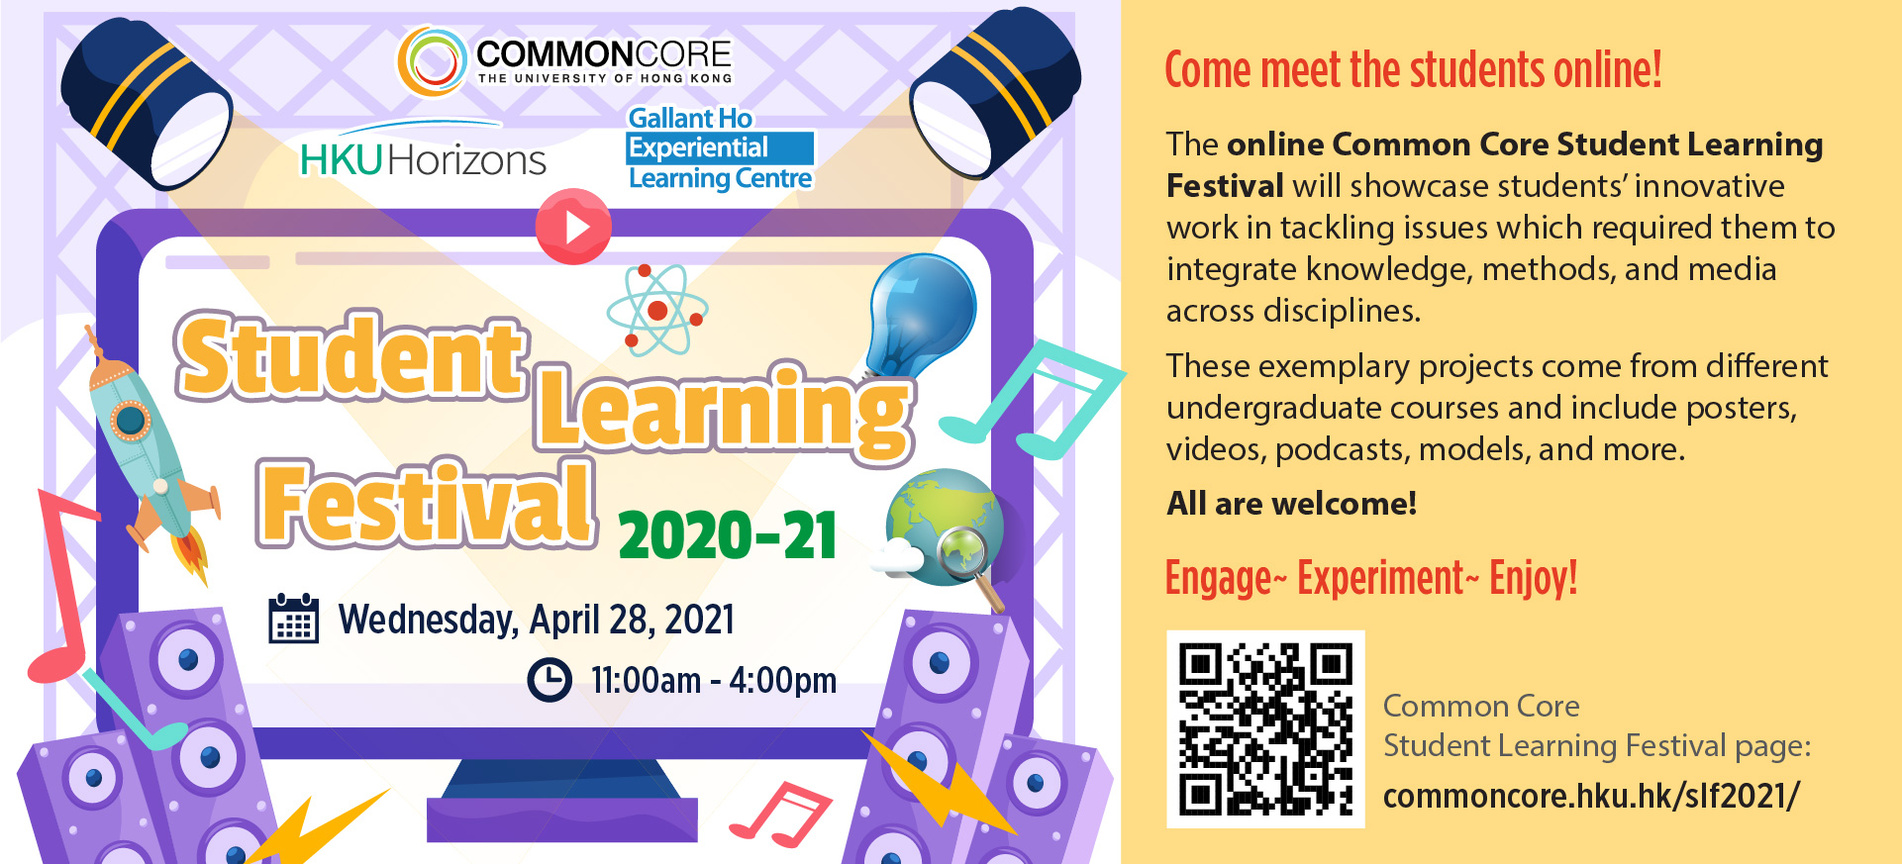 Common Core Student Learning Festival 2020-21